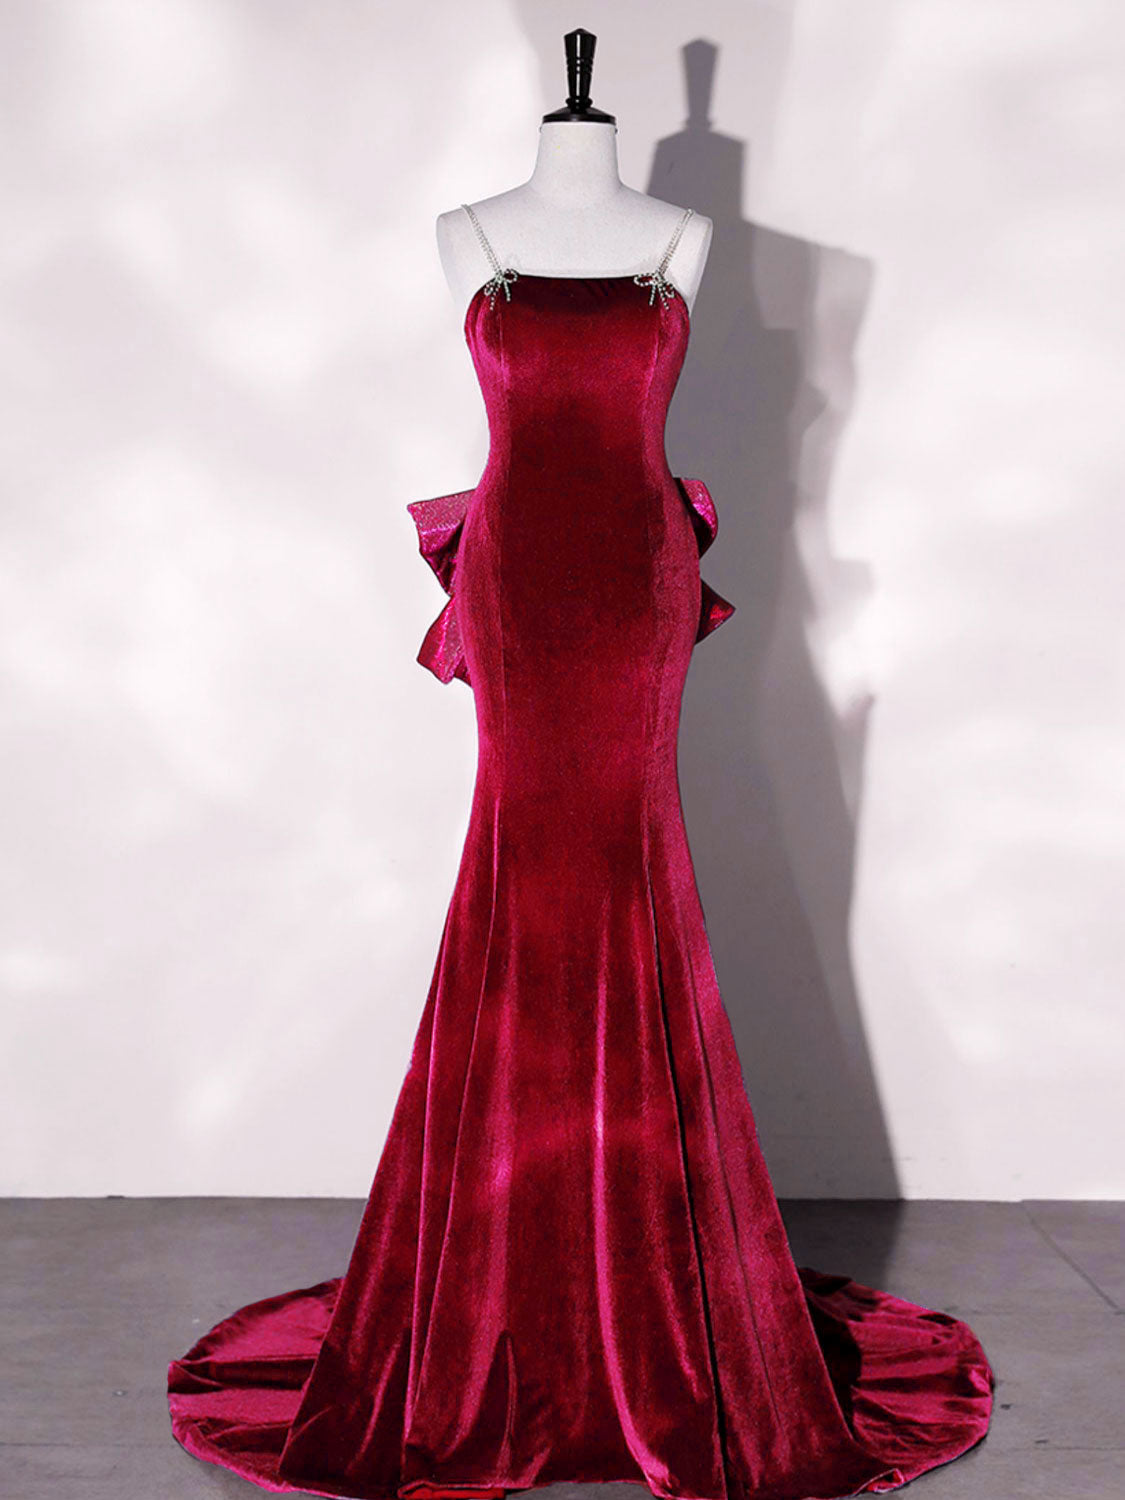 Spaghetti Strap Red Velvet Mermaid Prom Dress with Big Bow Back - DollyGown